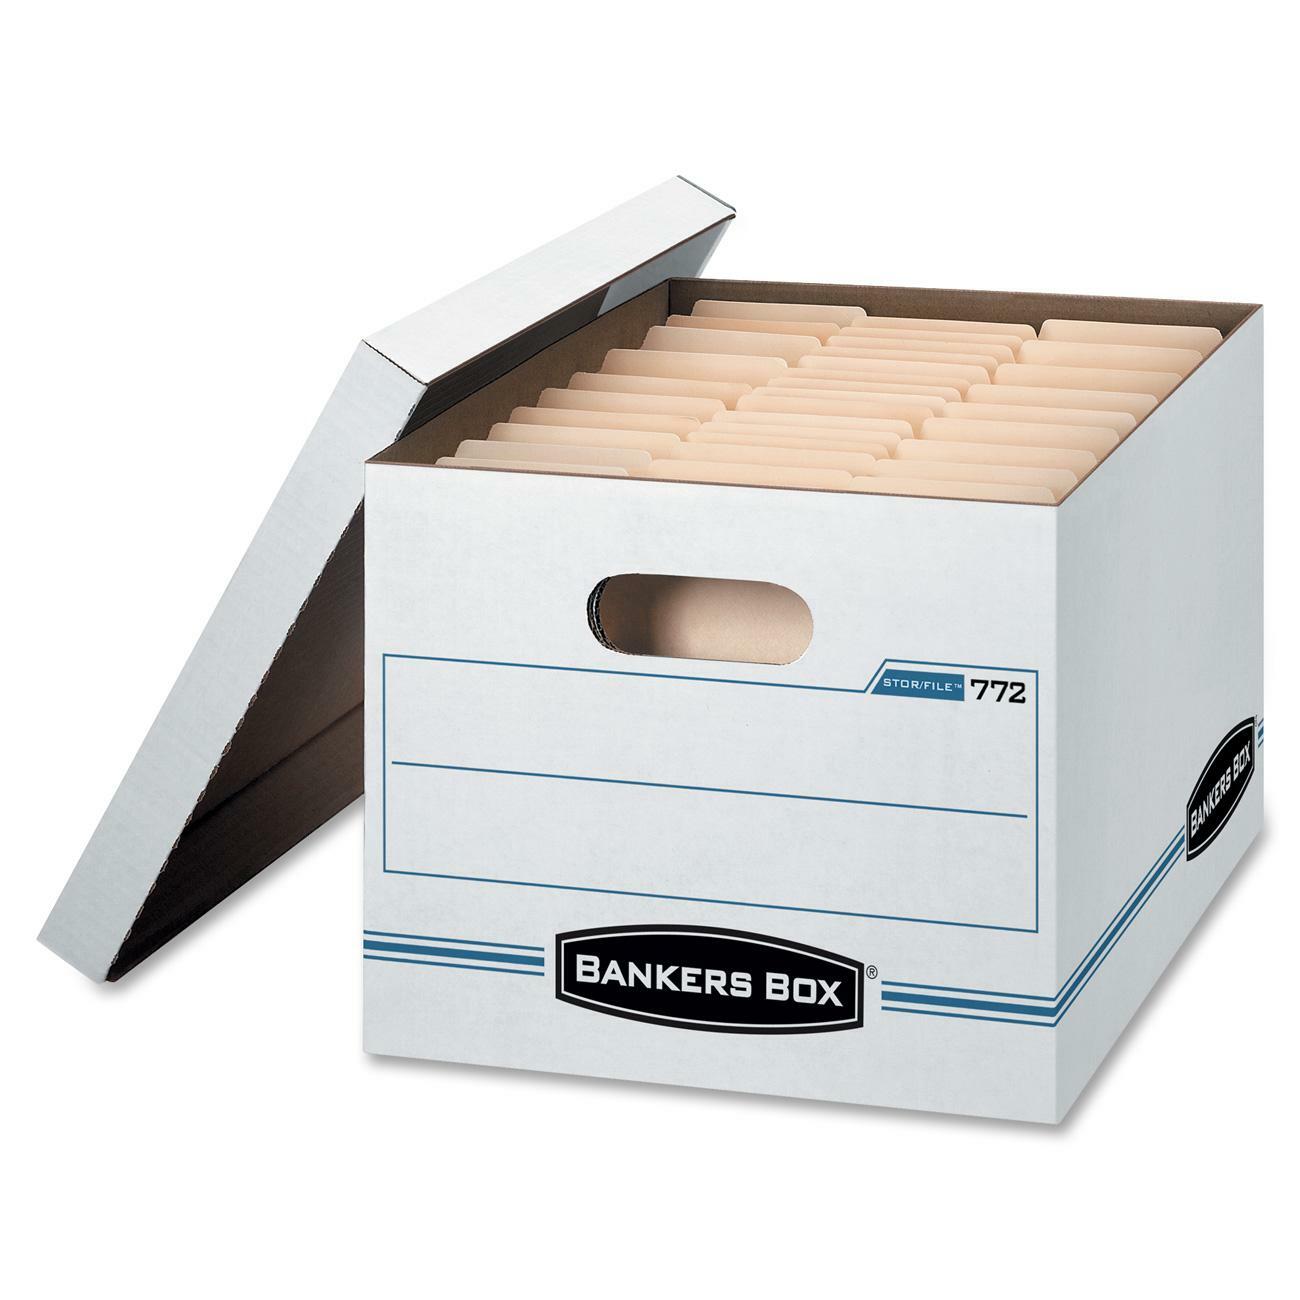 Bankers Box Light Duty Storage/File Box - External Dimensions: 15 Width x  12 Depth x 10Height - Media Size Supported: Letter, Legal - Lift-off